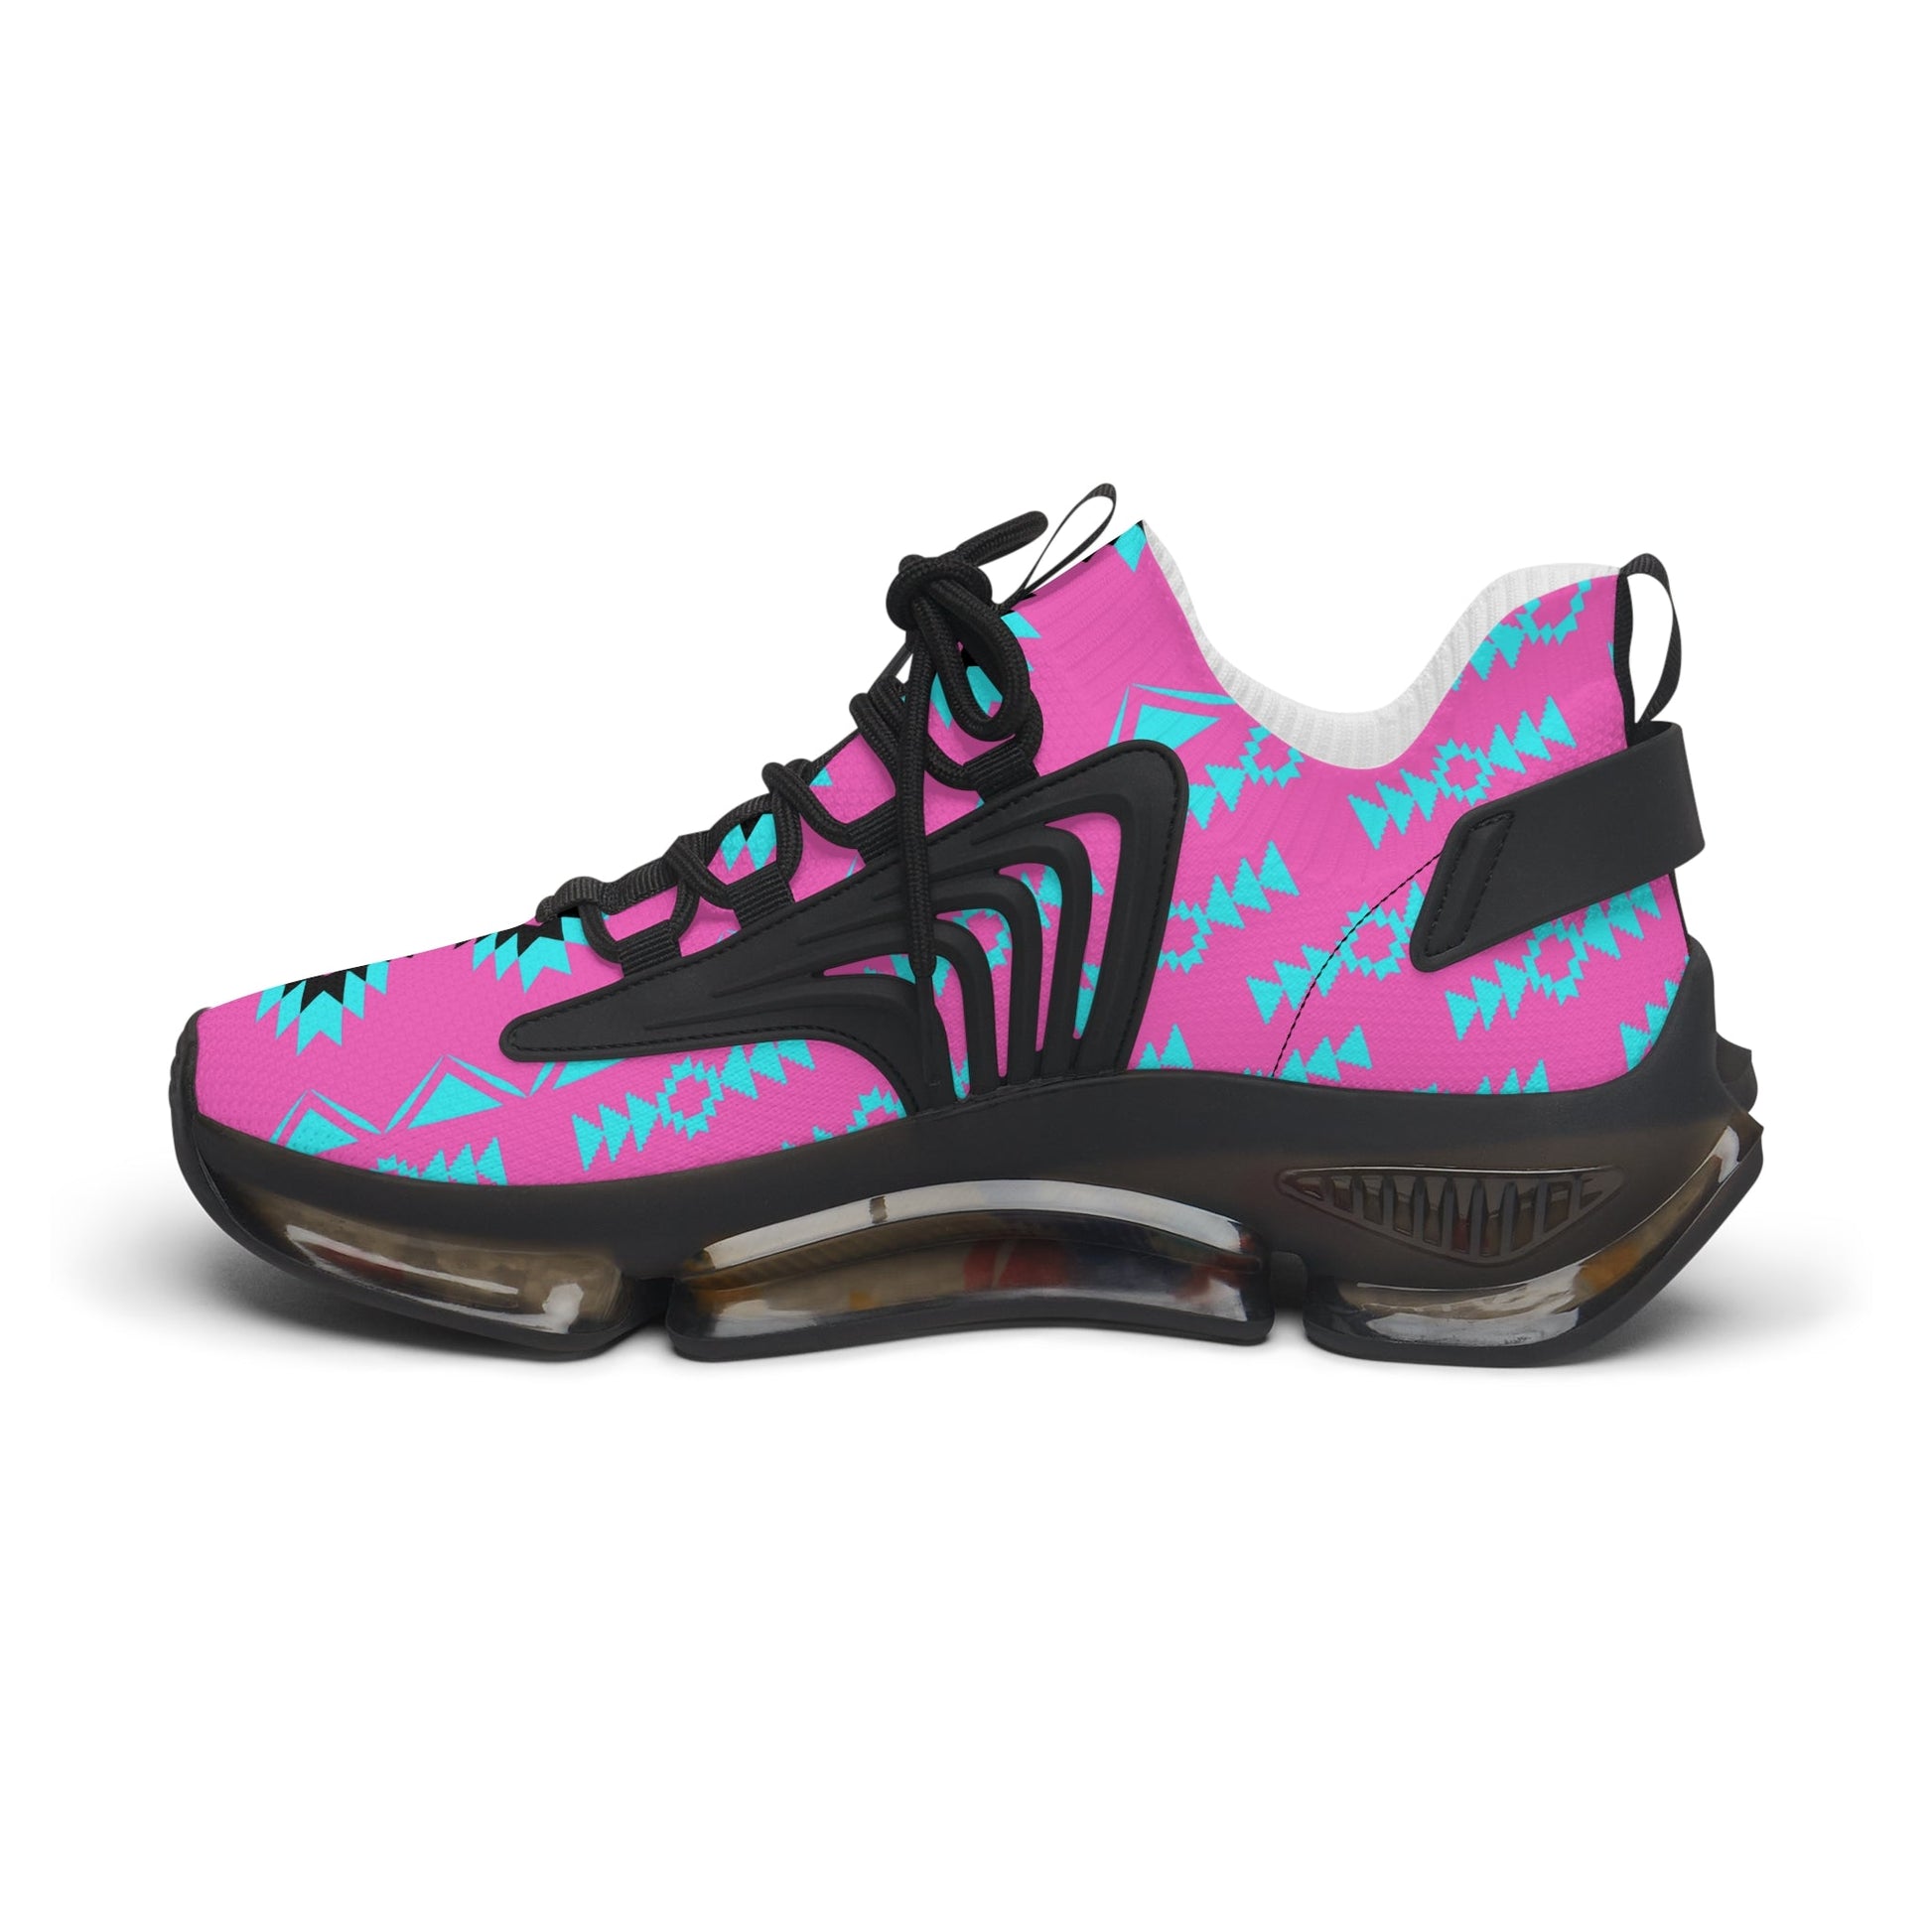 Women's Native Pink and Blue Mesh Sneakers - Nikikw Designs